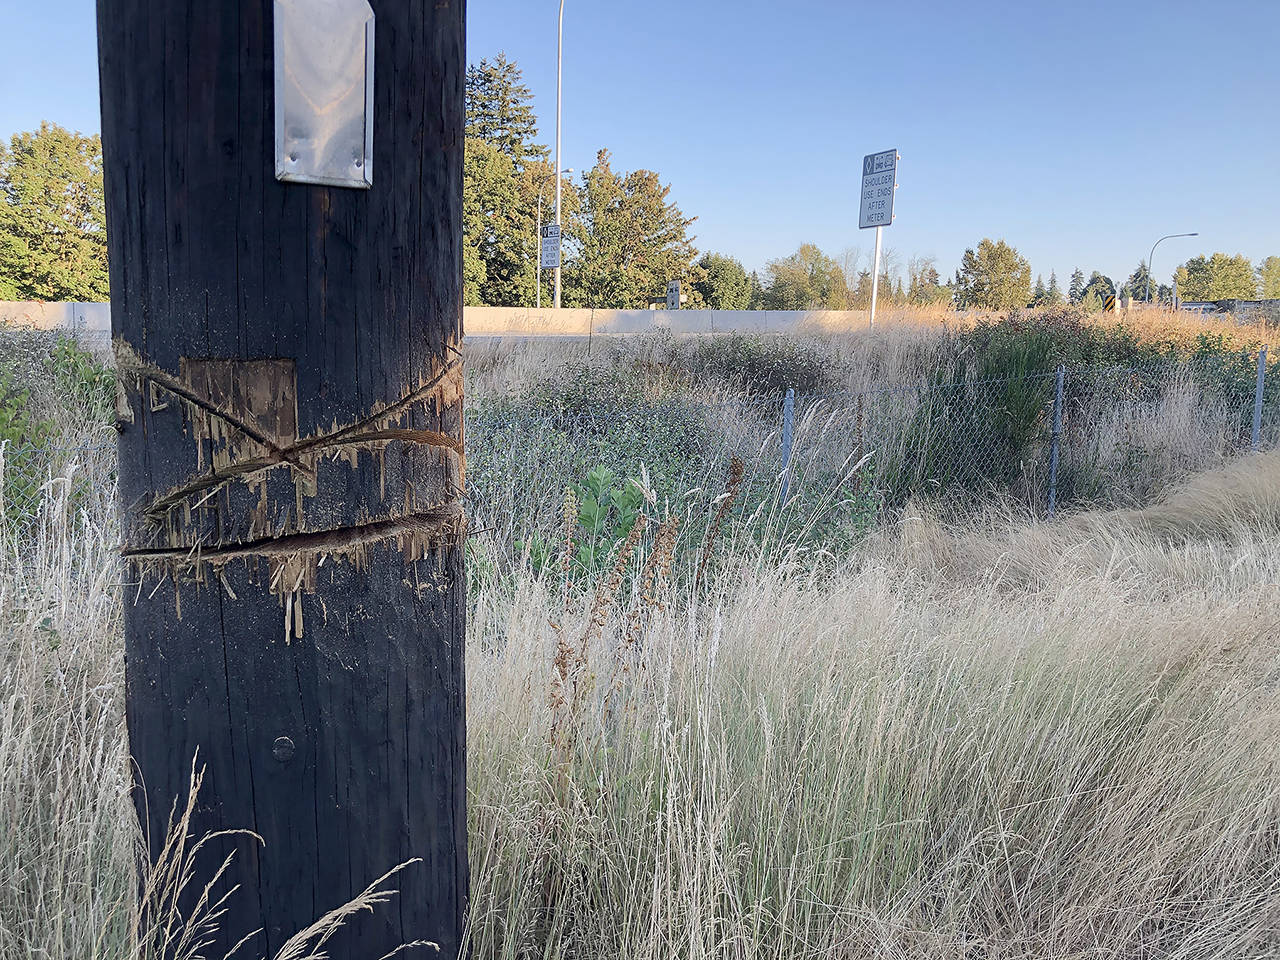 Cuts are visible in a Snohomish County PUD power pole in Lynnwood. (Snohomish County PUD)